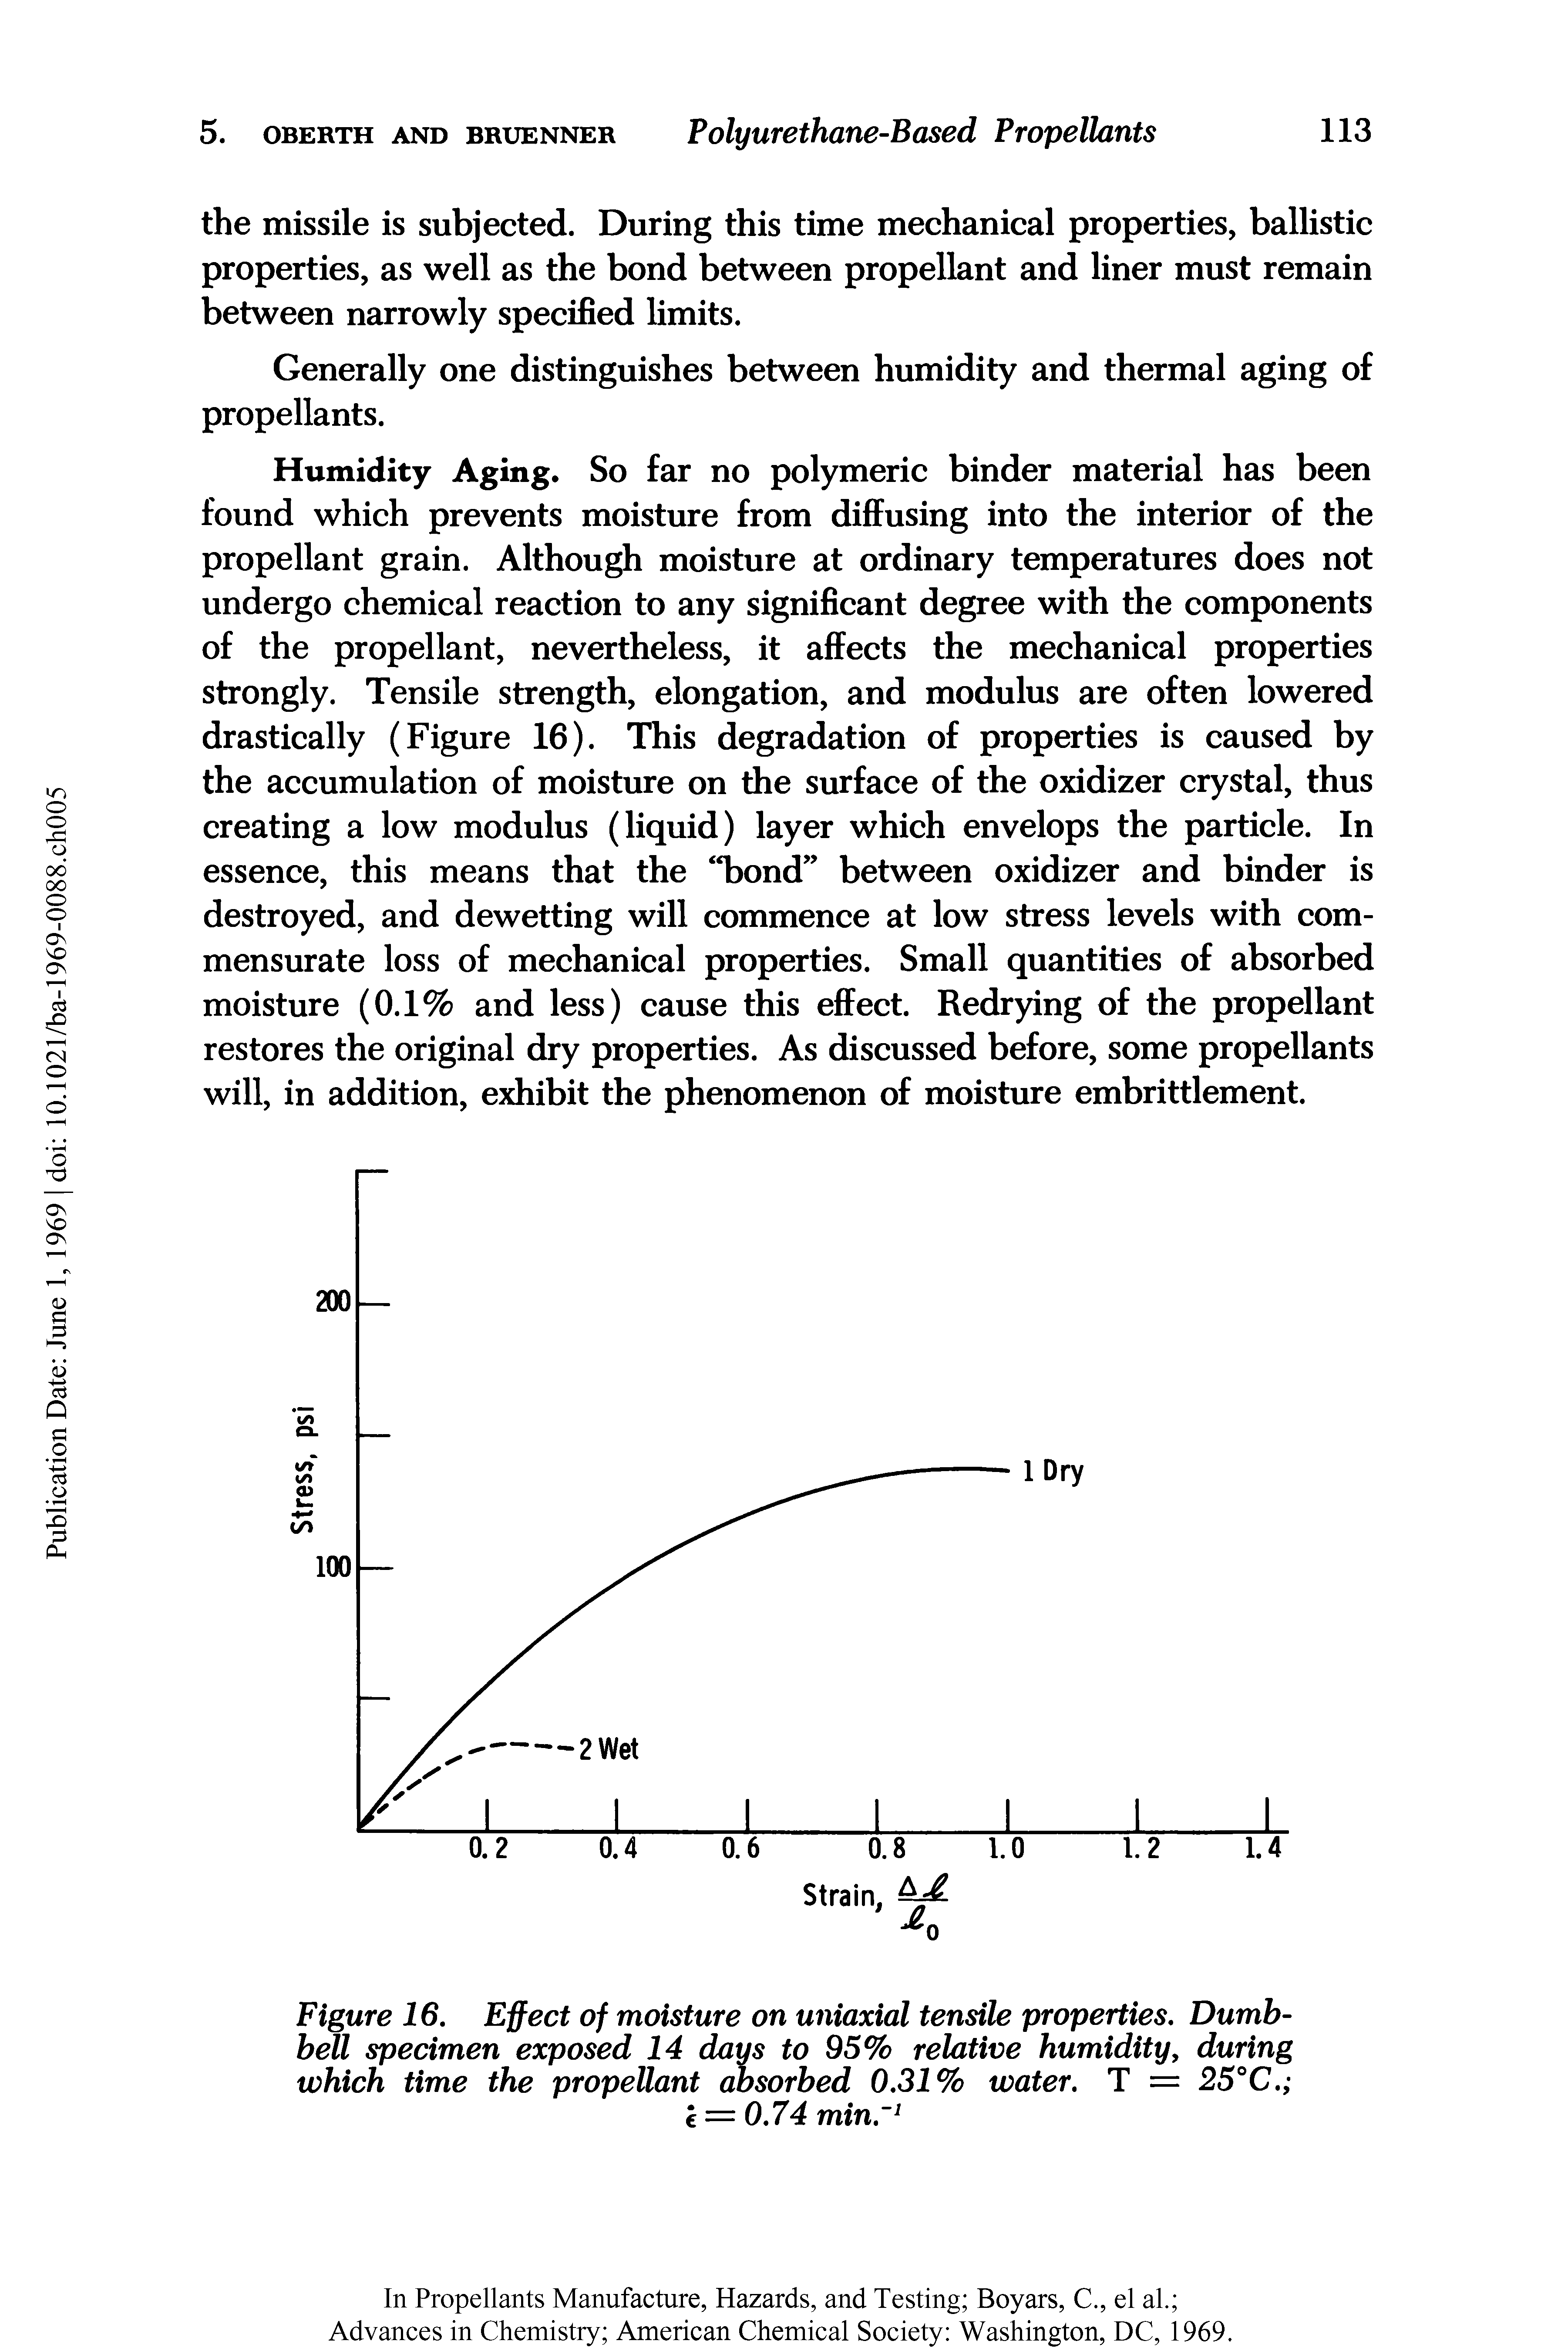 Figure 16. Effect of moisture on uniaxial tensile properties. Dumbbell specimen exposed 14 days to 95% relative humidity, during which time the propellant absorbed 0.31% water. T = 25°C. 1 = 0.74 minr1...